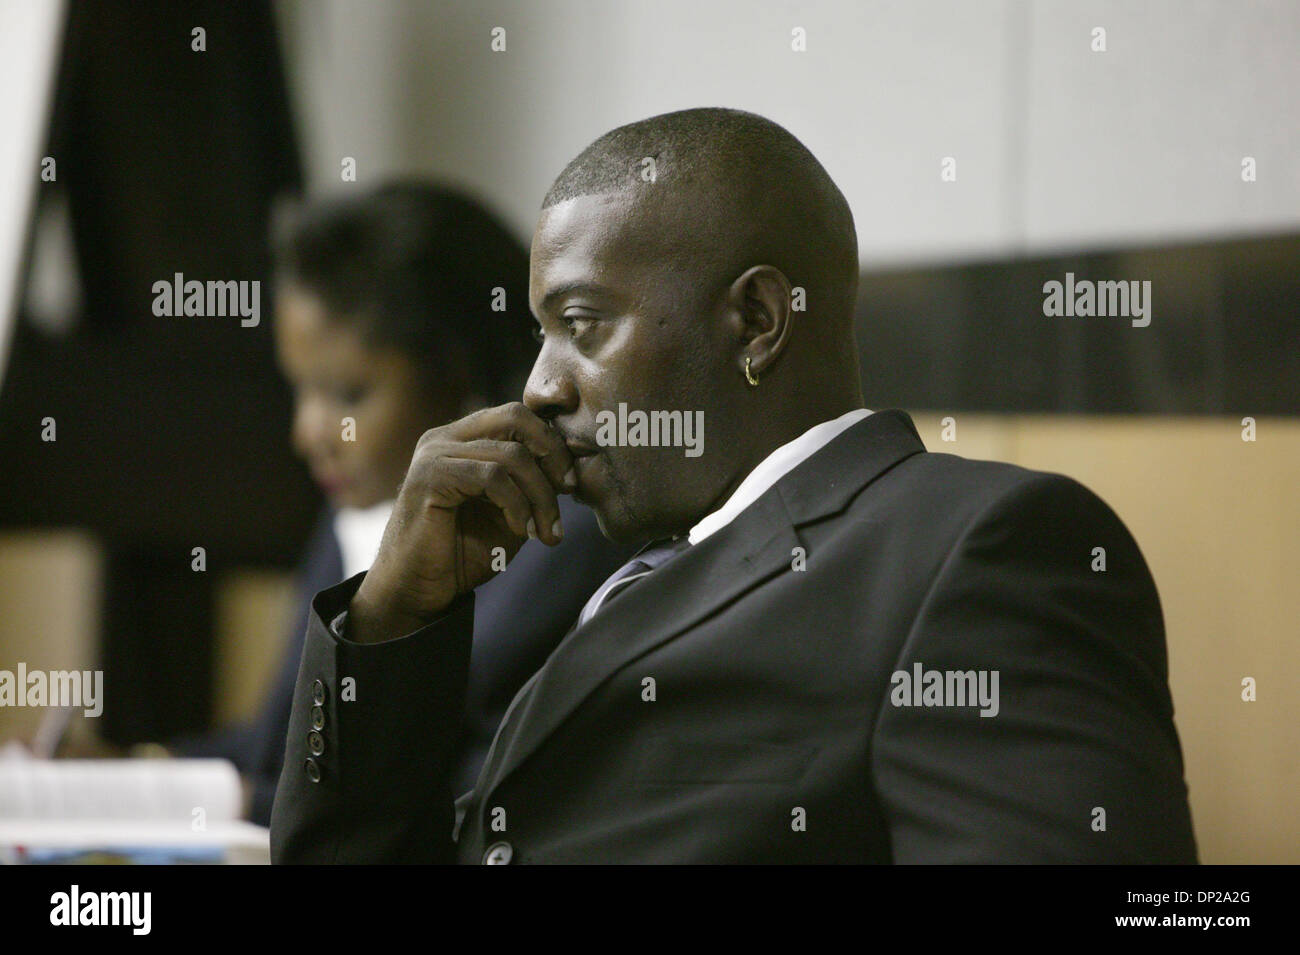 May 24, 2006; West Palm Beach, FL, USA; Kenneth Miller at the defense table Wednesday  in a paternity suit in Judge Karen Martin's courtroom.Terry Glover claims he is the biological father of Jerrod Miller. Mandatory Credit: Photo by Greg Lovett/Palm Beach Post/ZUMA Press. (©) Copyright 2006 by Palm Beach Post Stock Photo